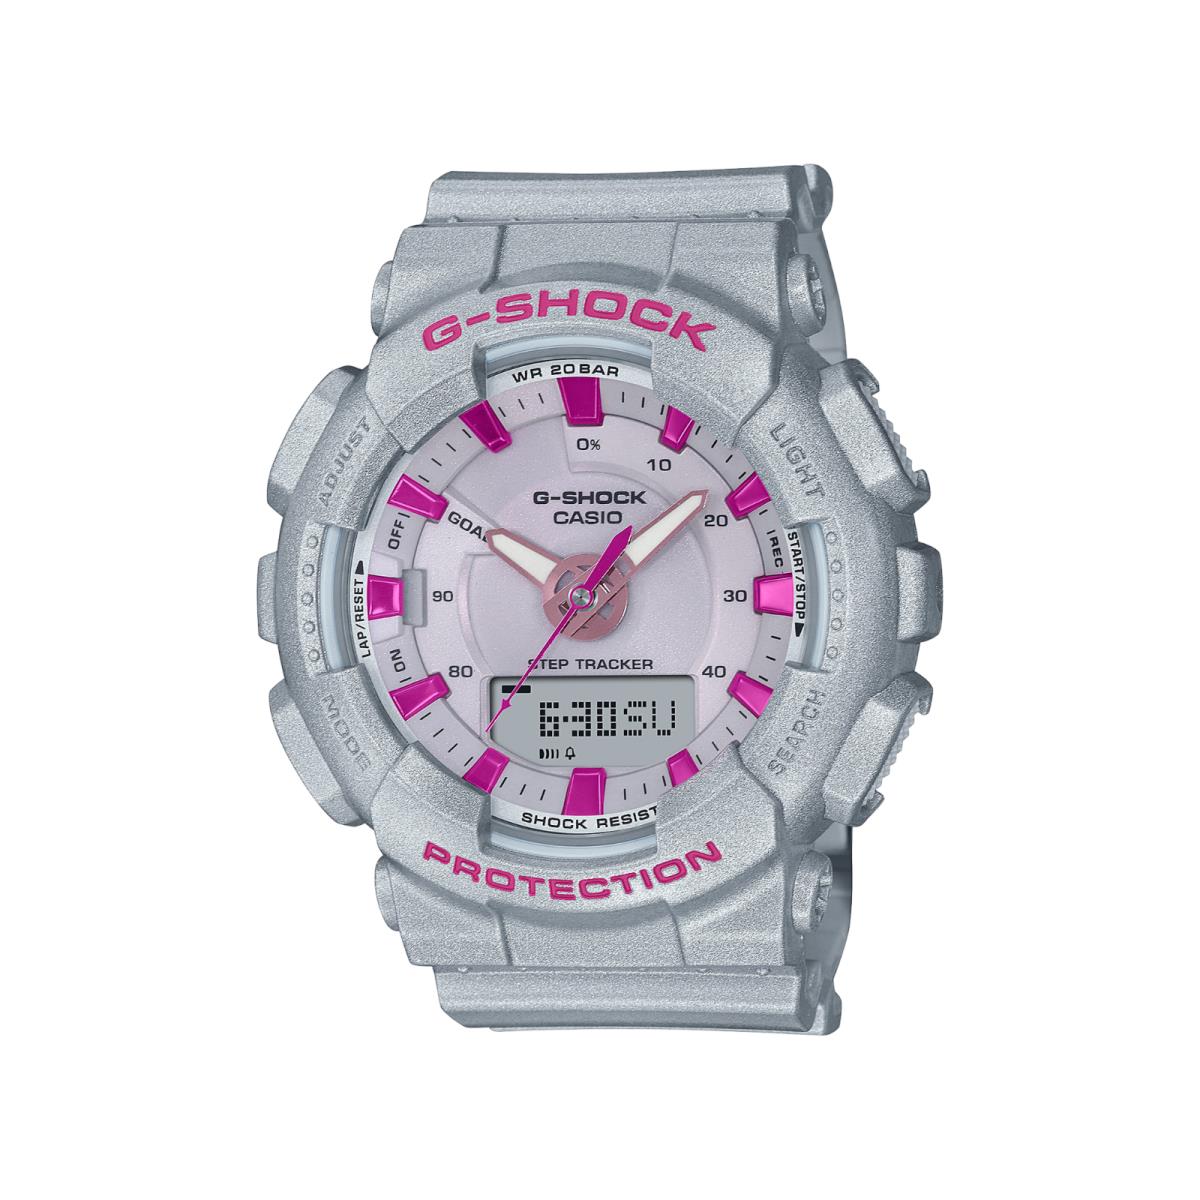 Casio G-shock S Series For Ladies` Glossy Grey Resin Band Watch GMAS130NP-8A